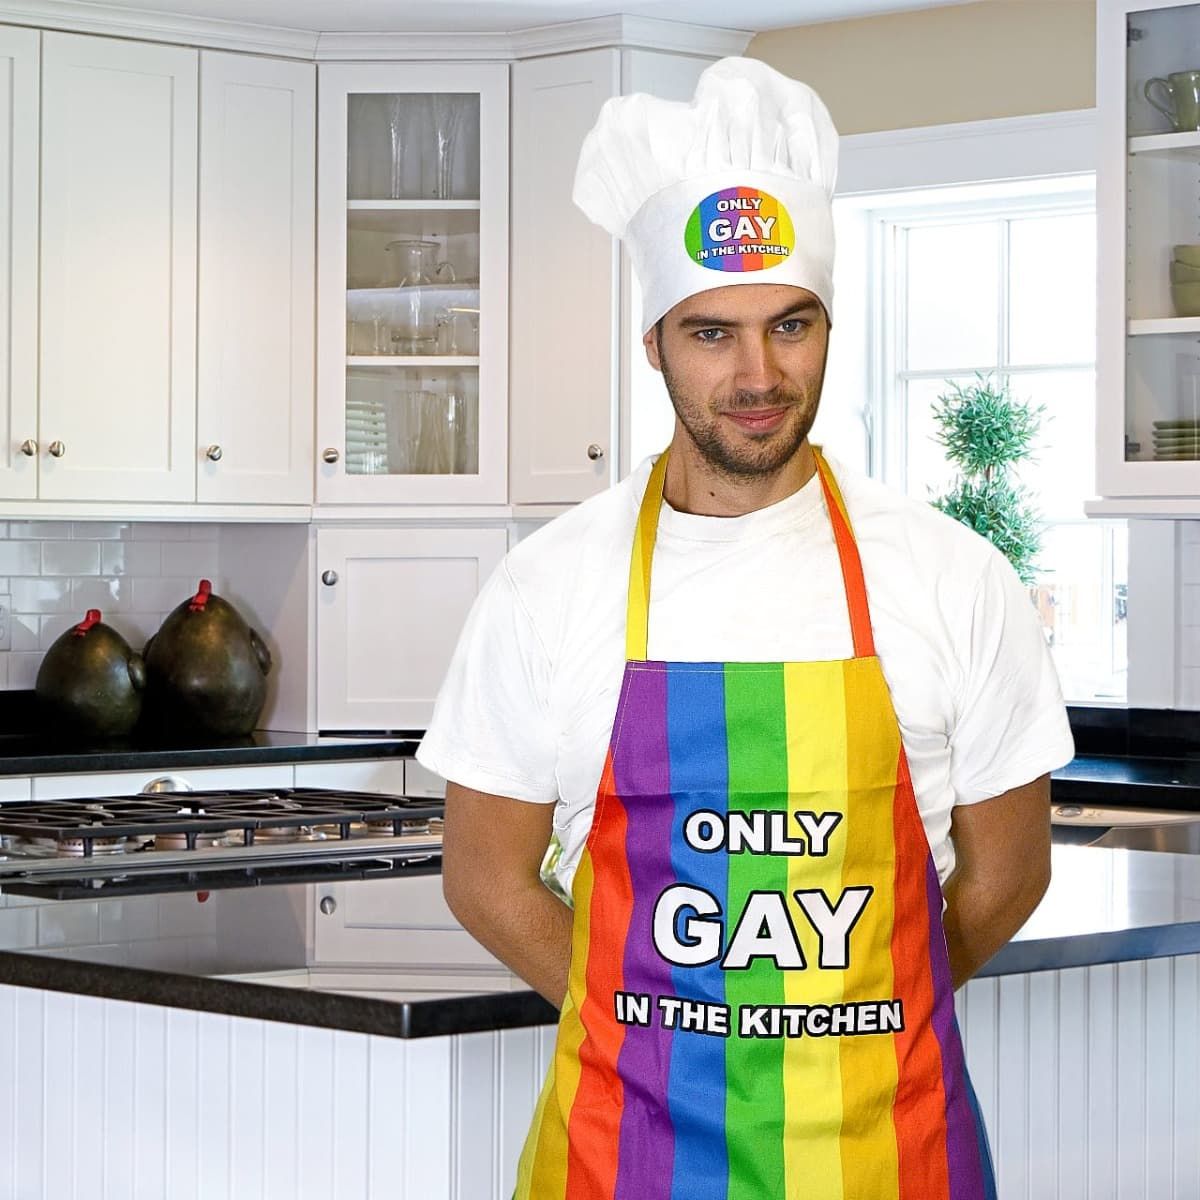 Only Gay in the Kitchen Apron and Hat BBQ Novelty Gift Set